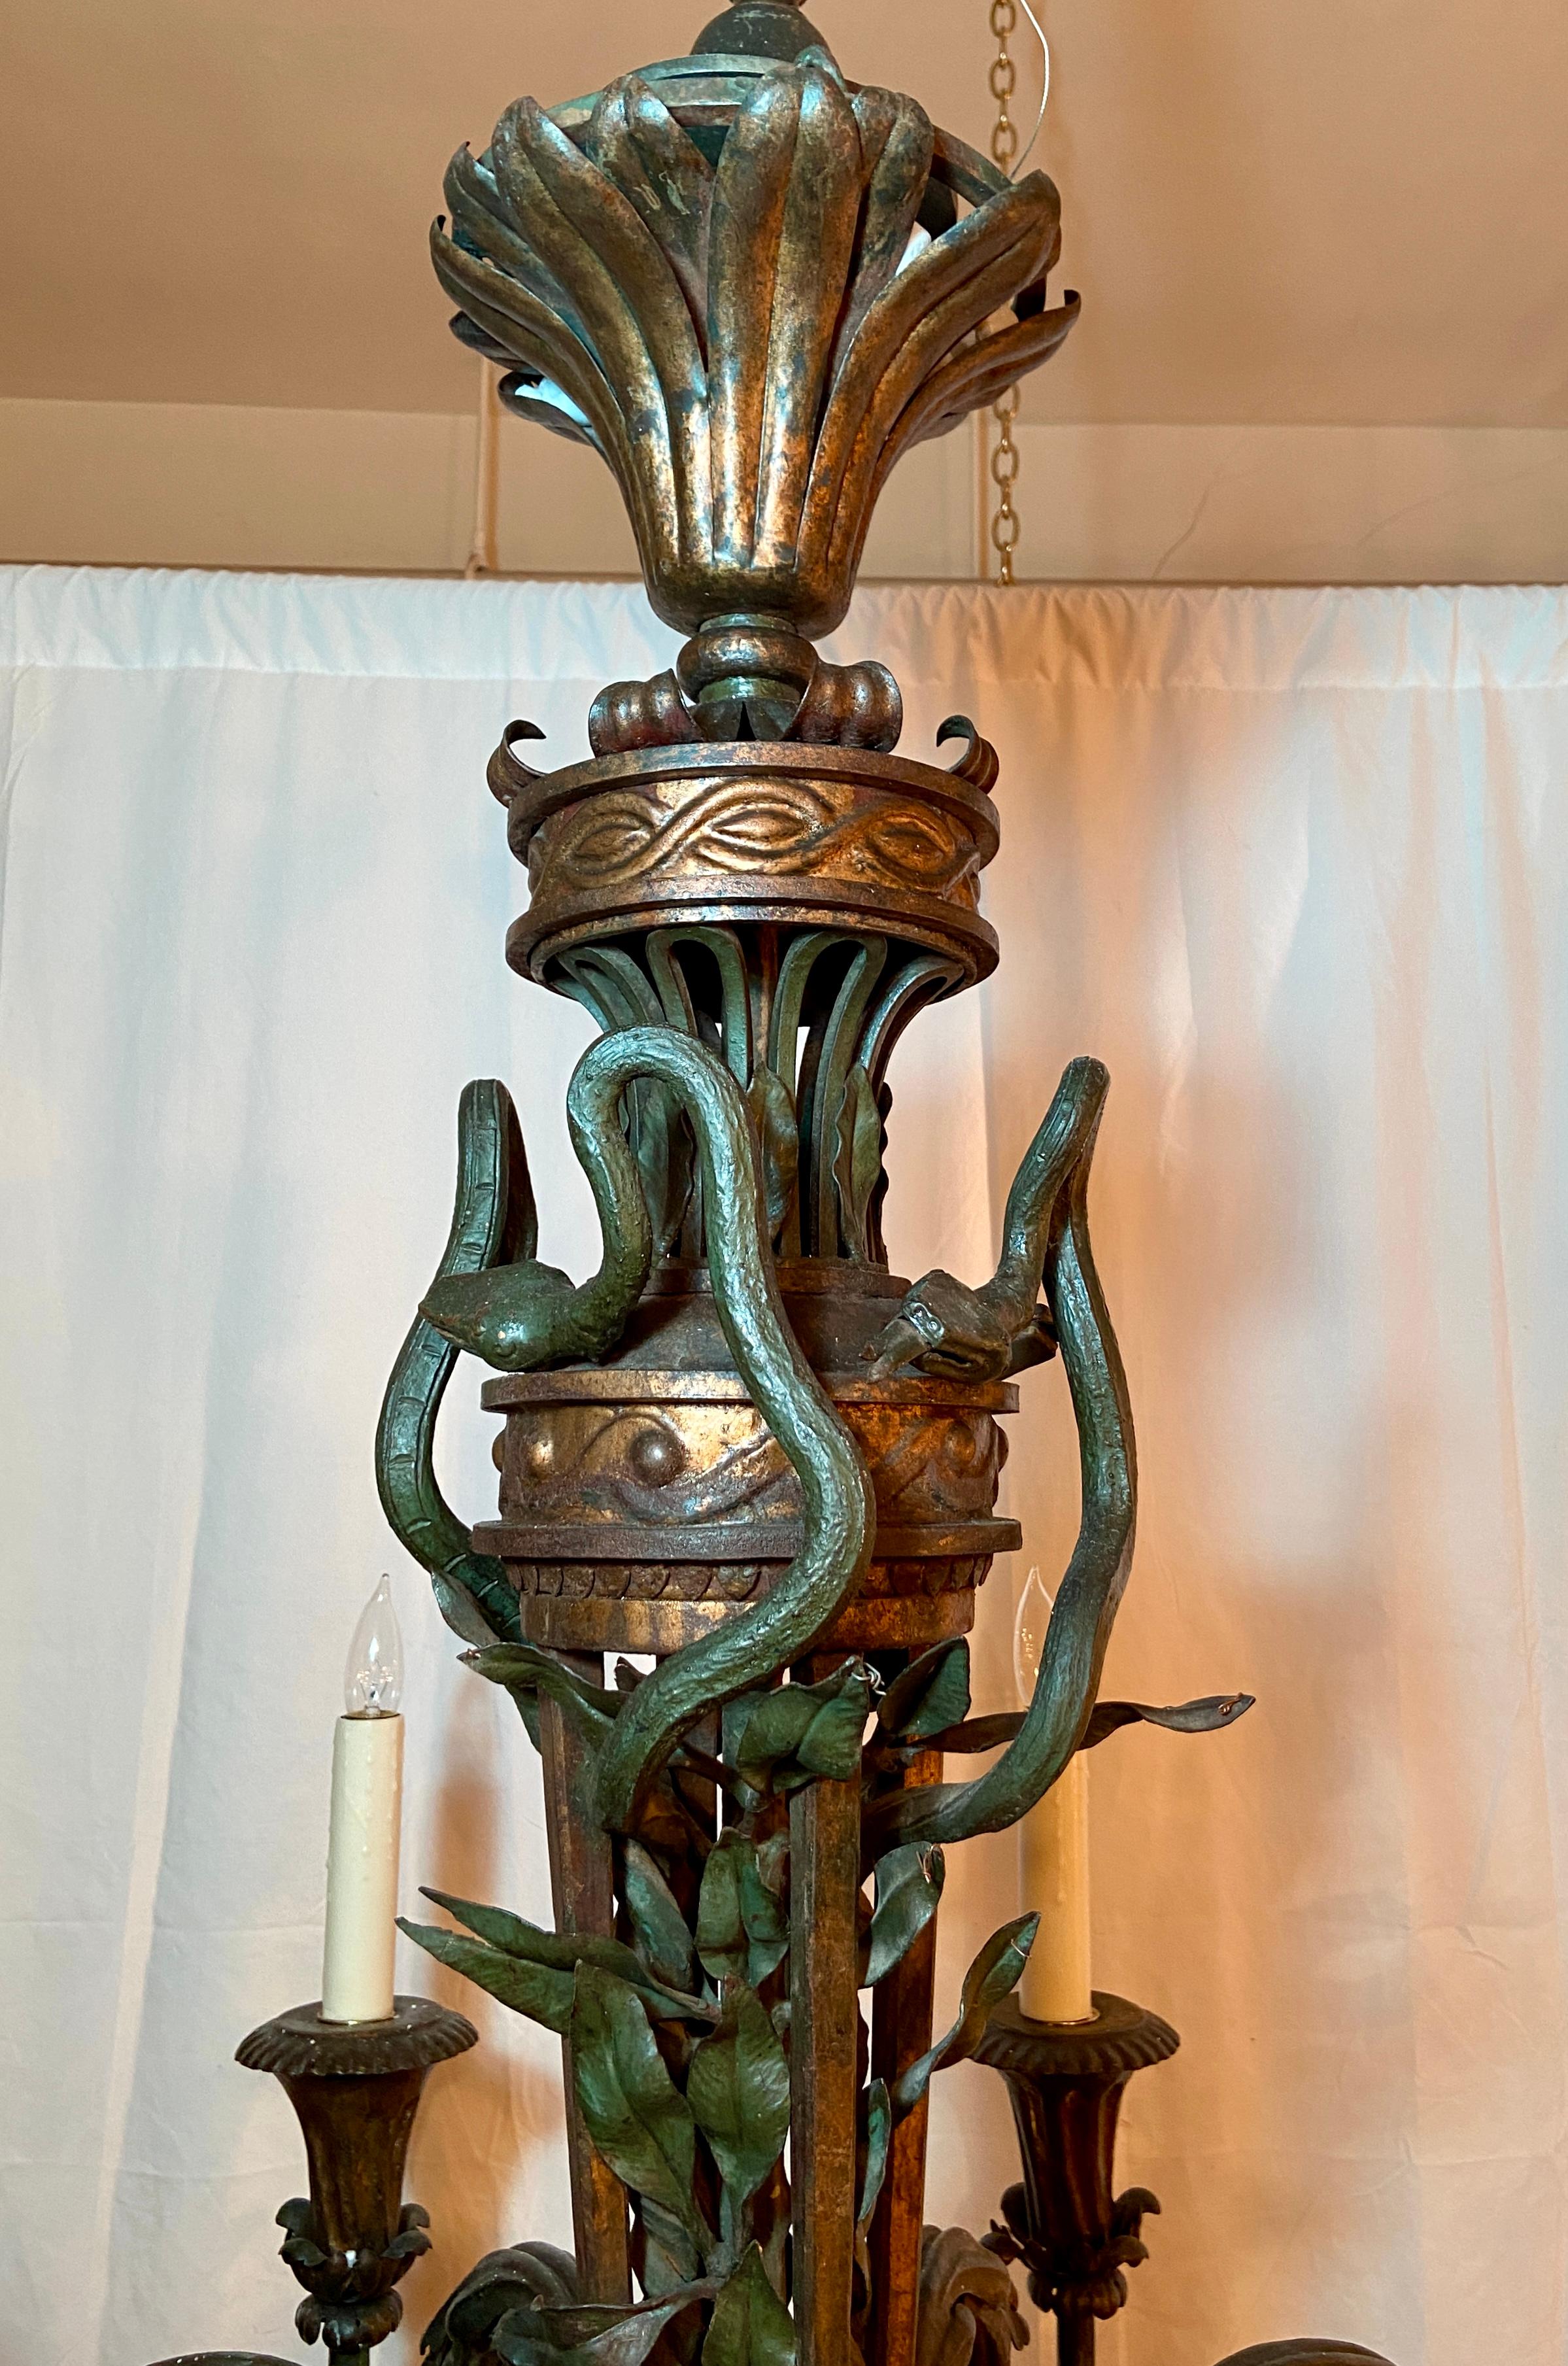 Antique 19th century French wrought iron chandelier with figural snakes, circa 1840.